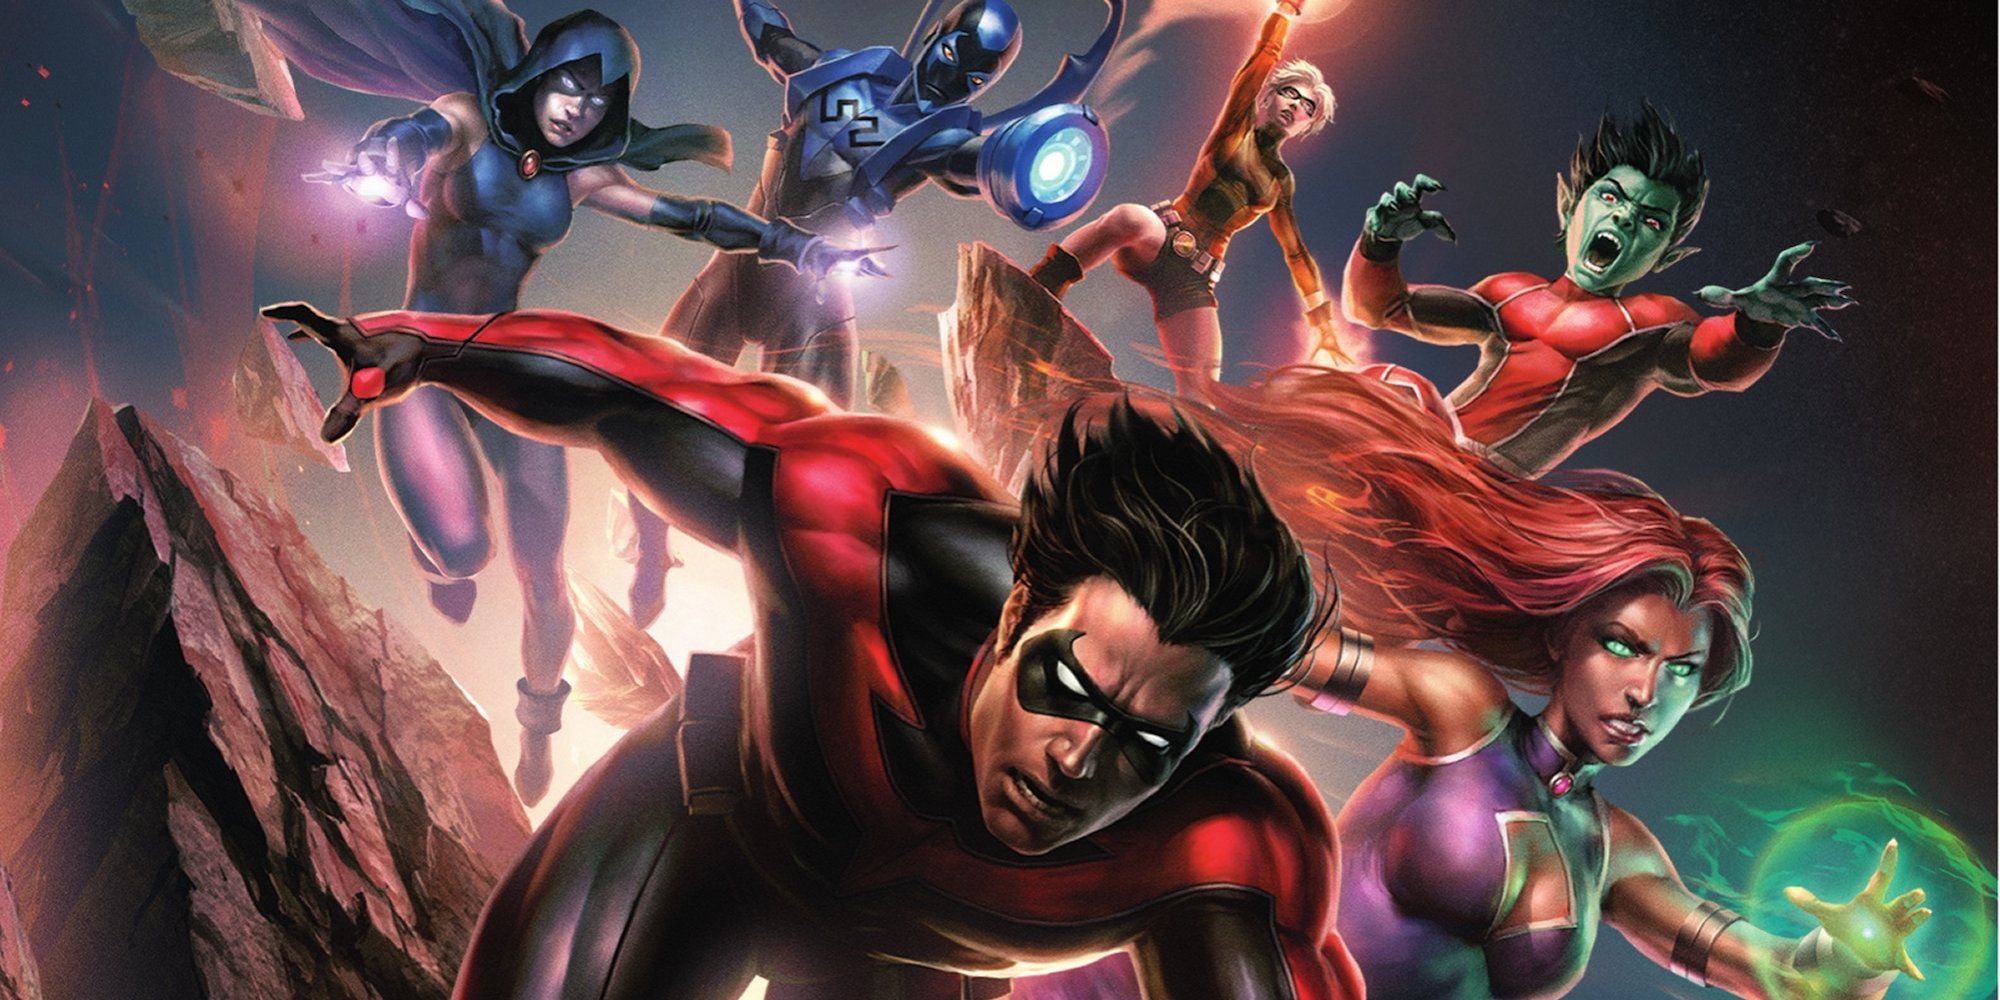 The Teen Titans head to battle in a poster for the Teen Titans Judas Contract movie